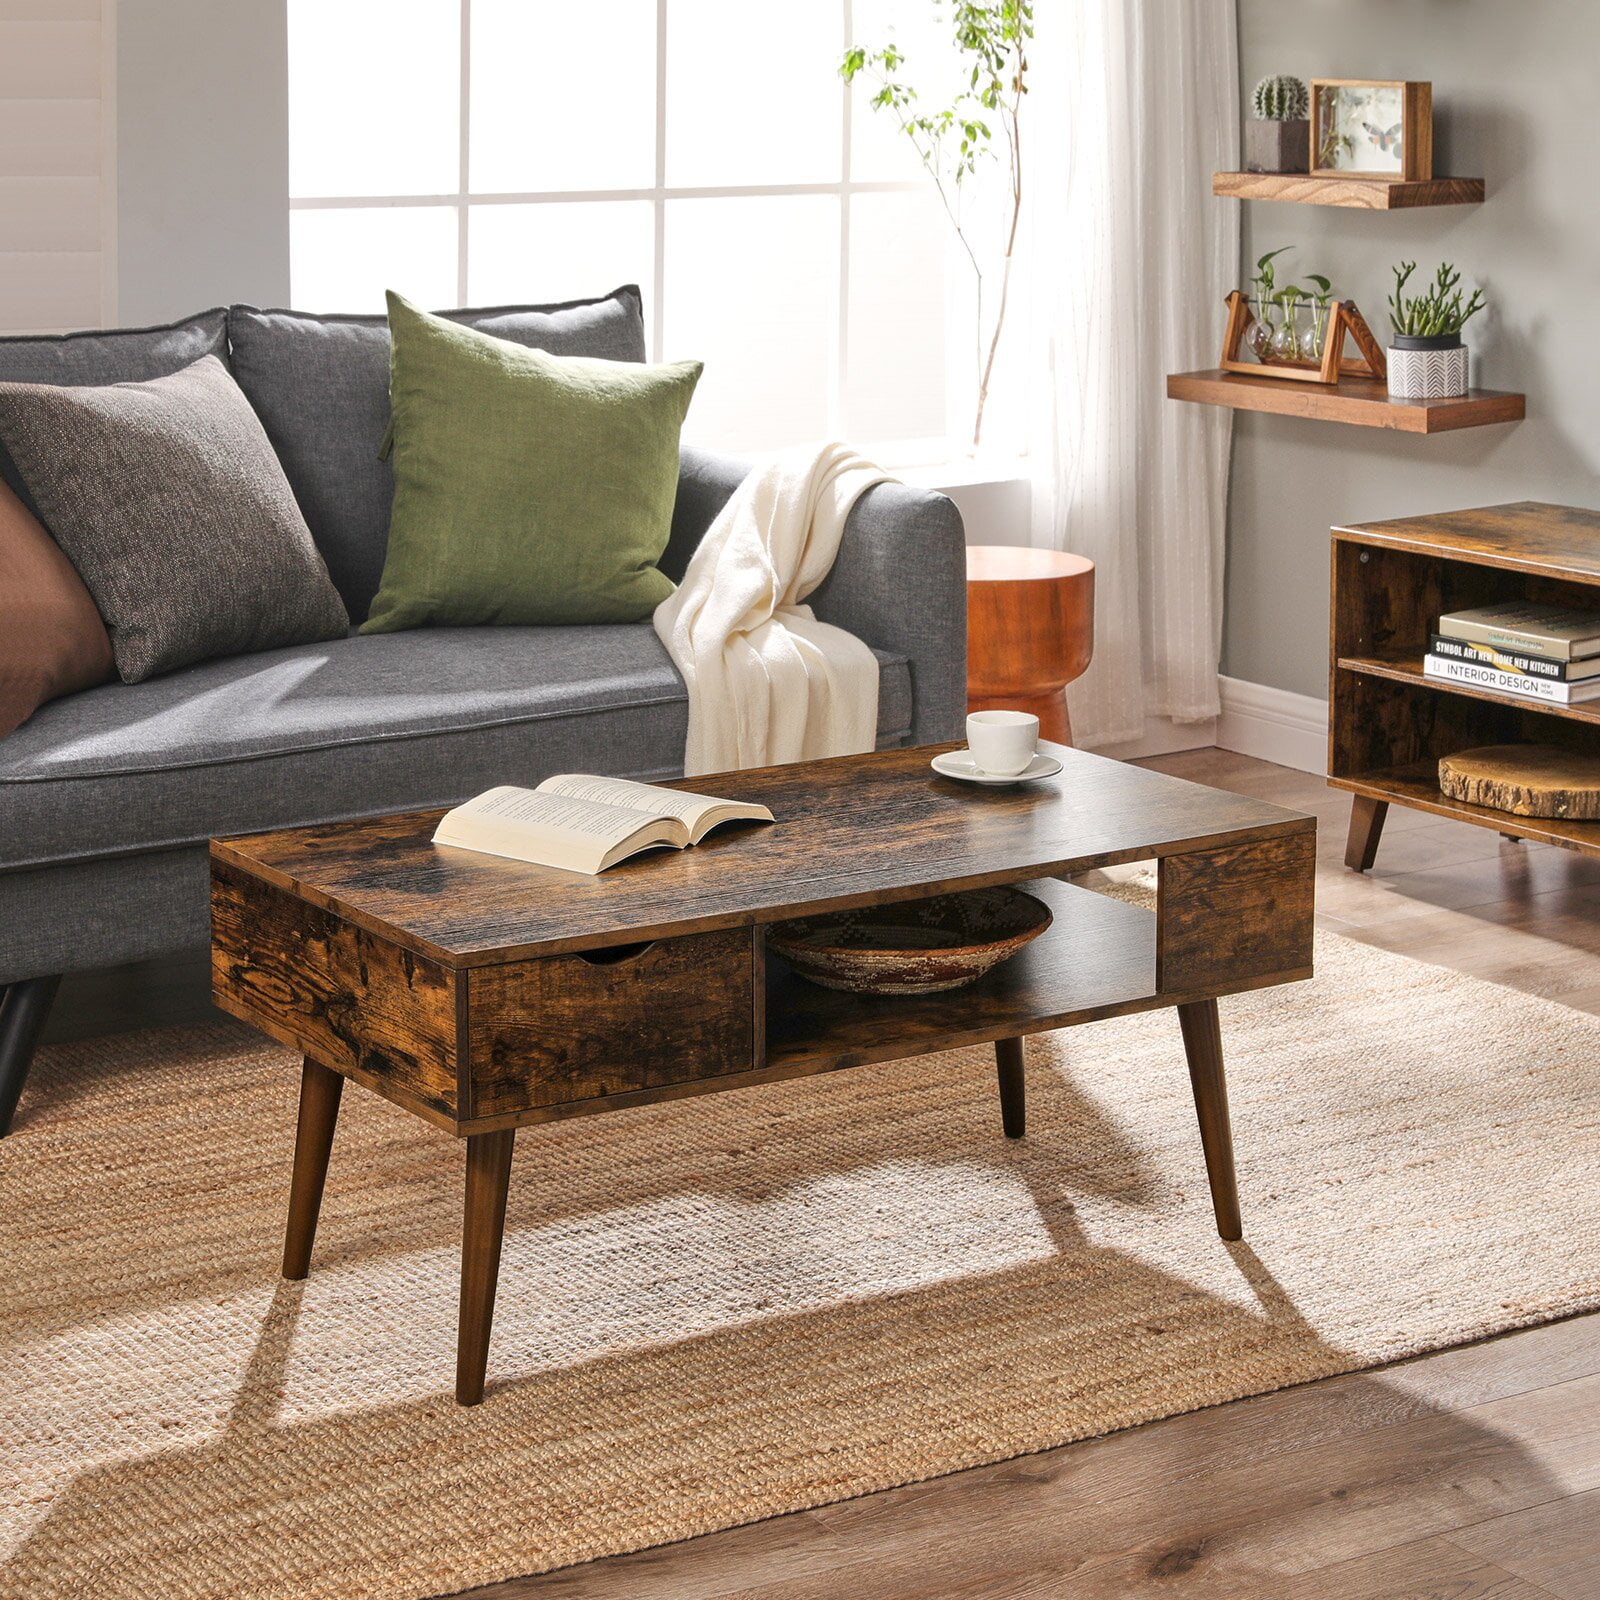 Details about   Natural Wood Finish Coffee Table W/ Shelf Durable Home Living Room Furniture 